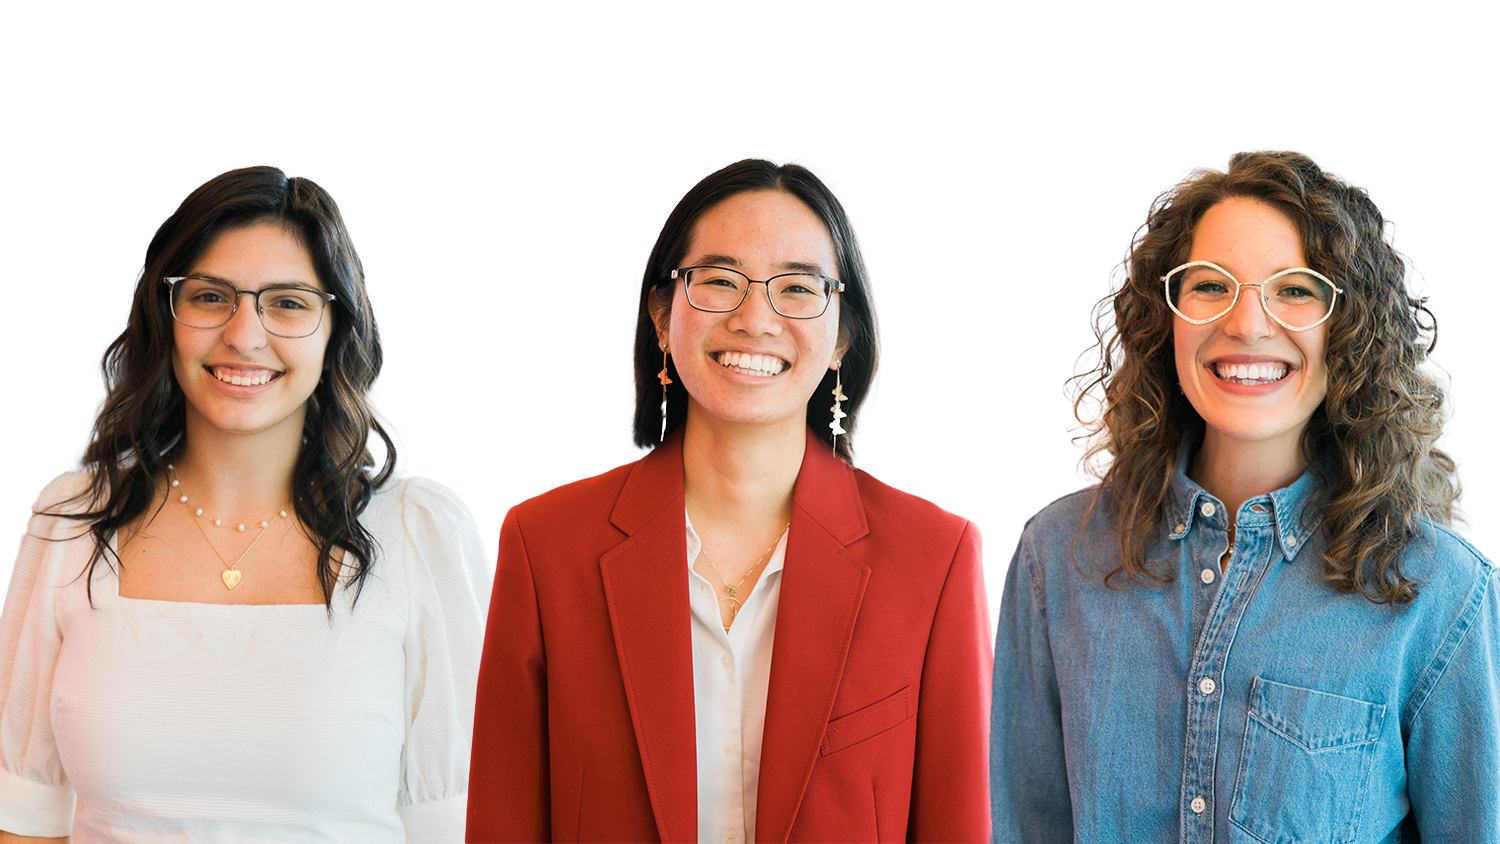 Left to right, Elizabeth Beese, Minh-Thu Dinh and Rachel Raineri.